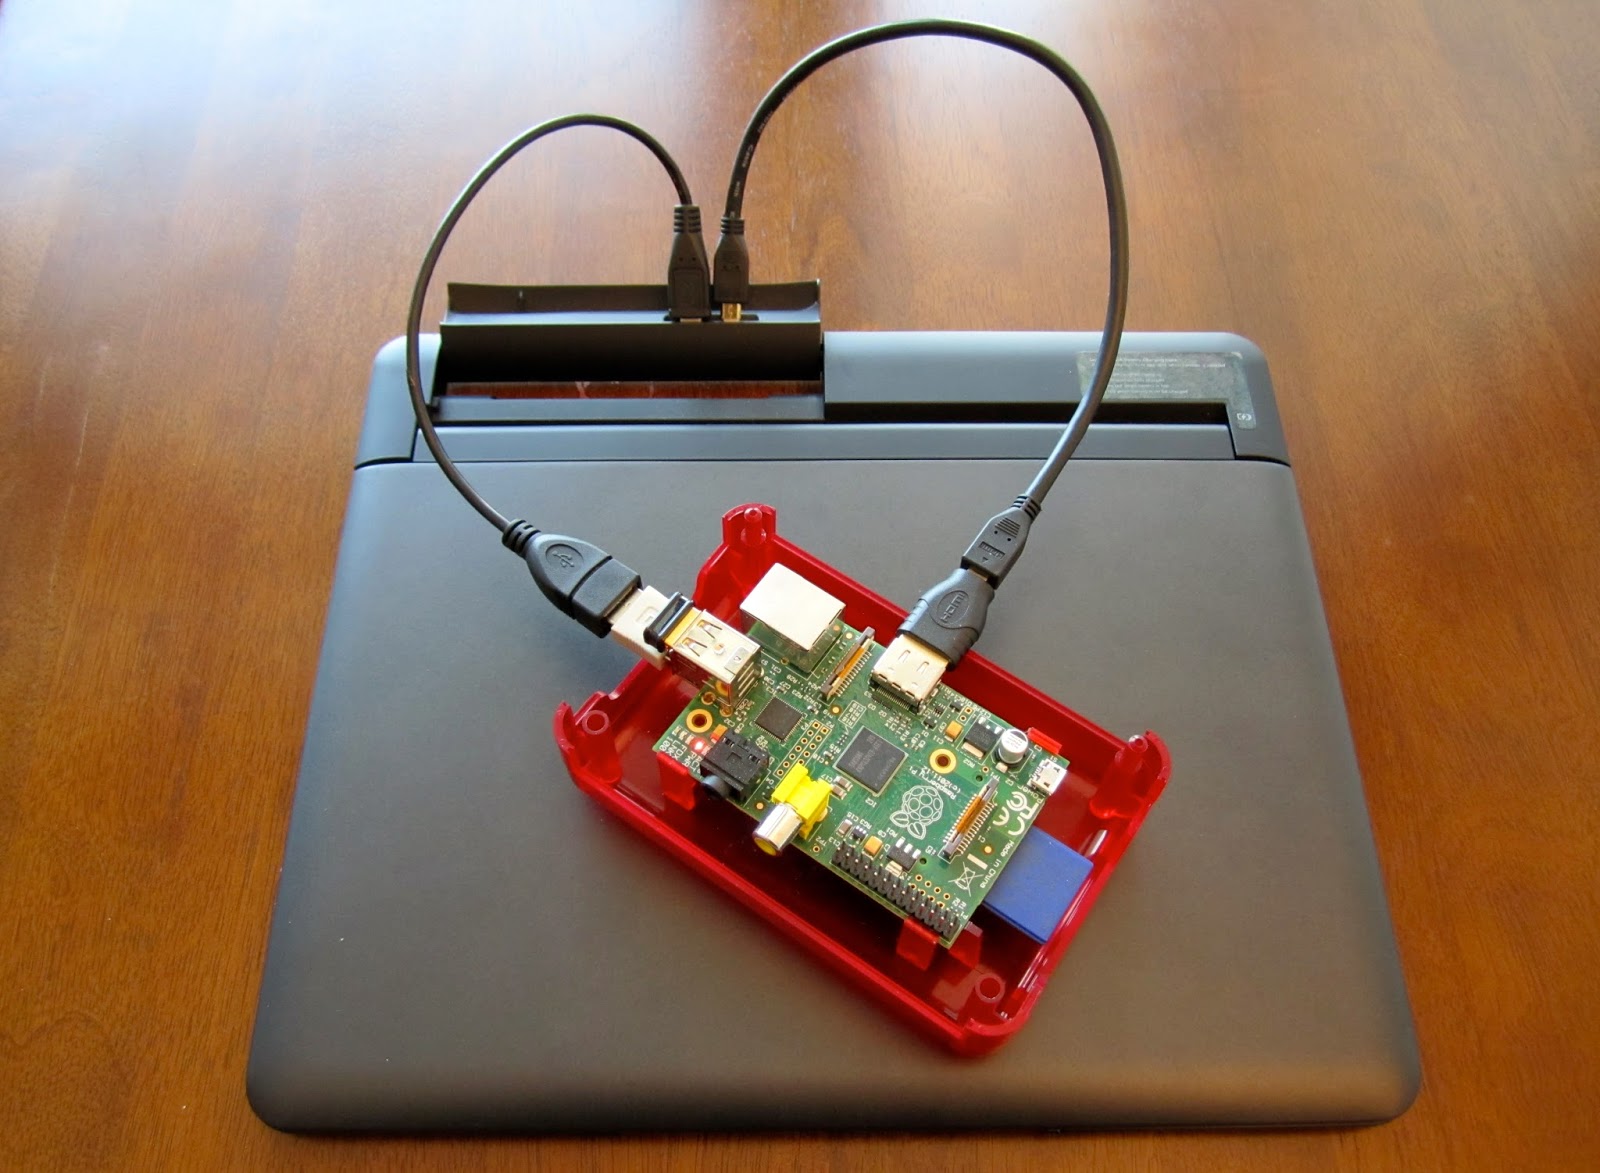 How To Make A Raspberry Pi Laptop With A Discontinued Moto Lapdock